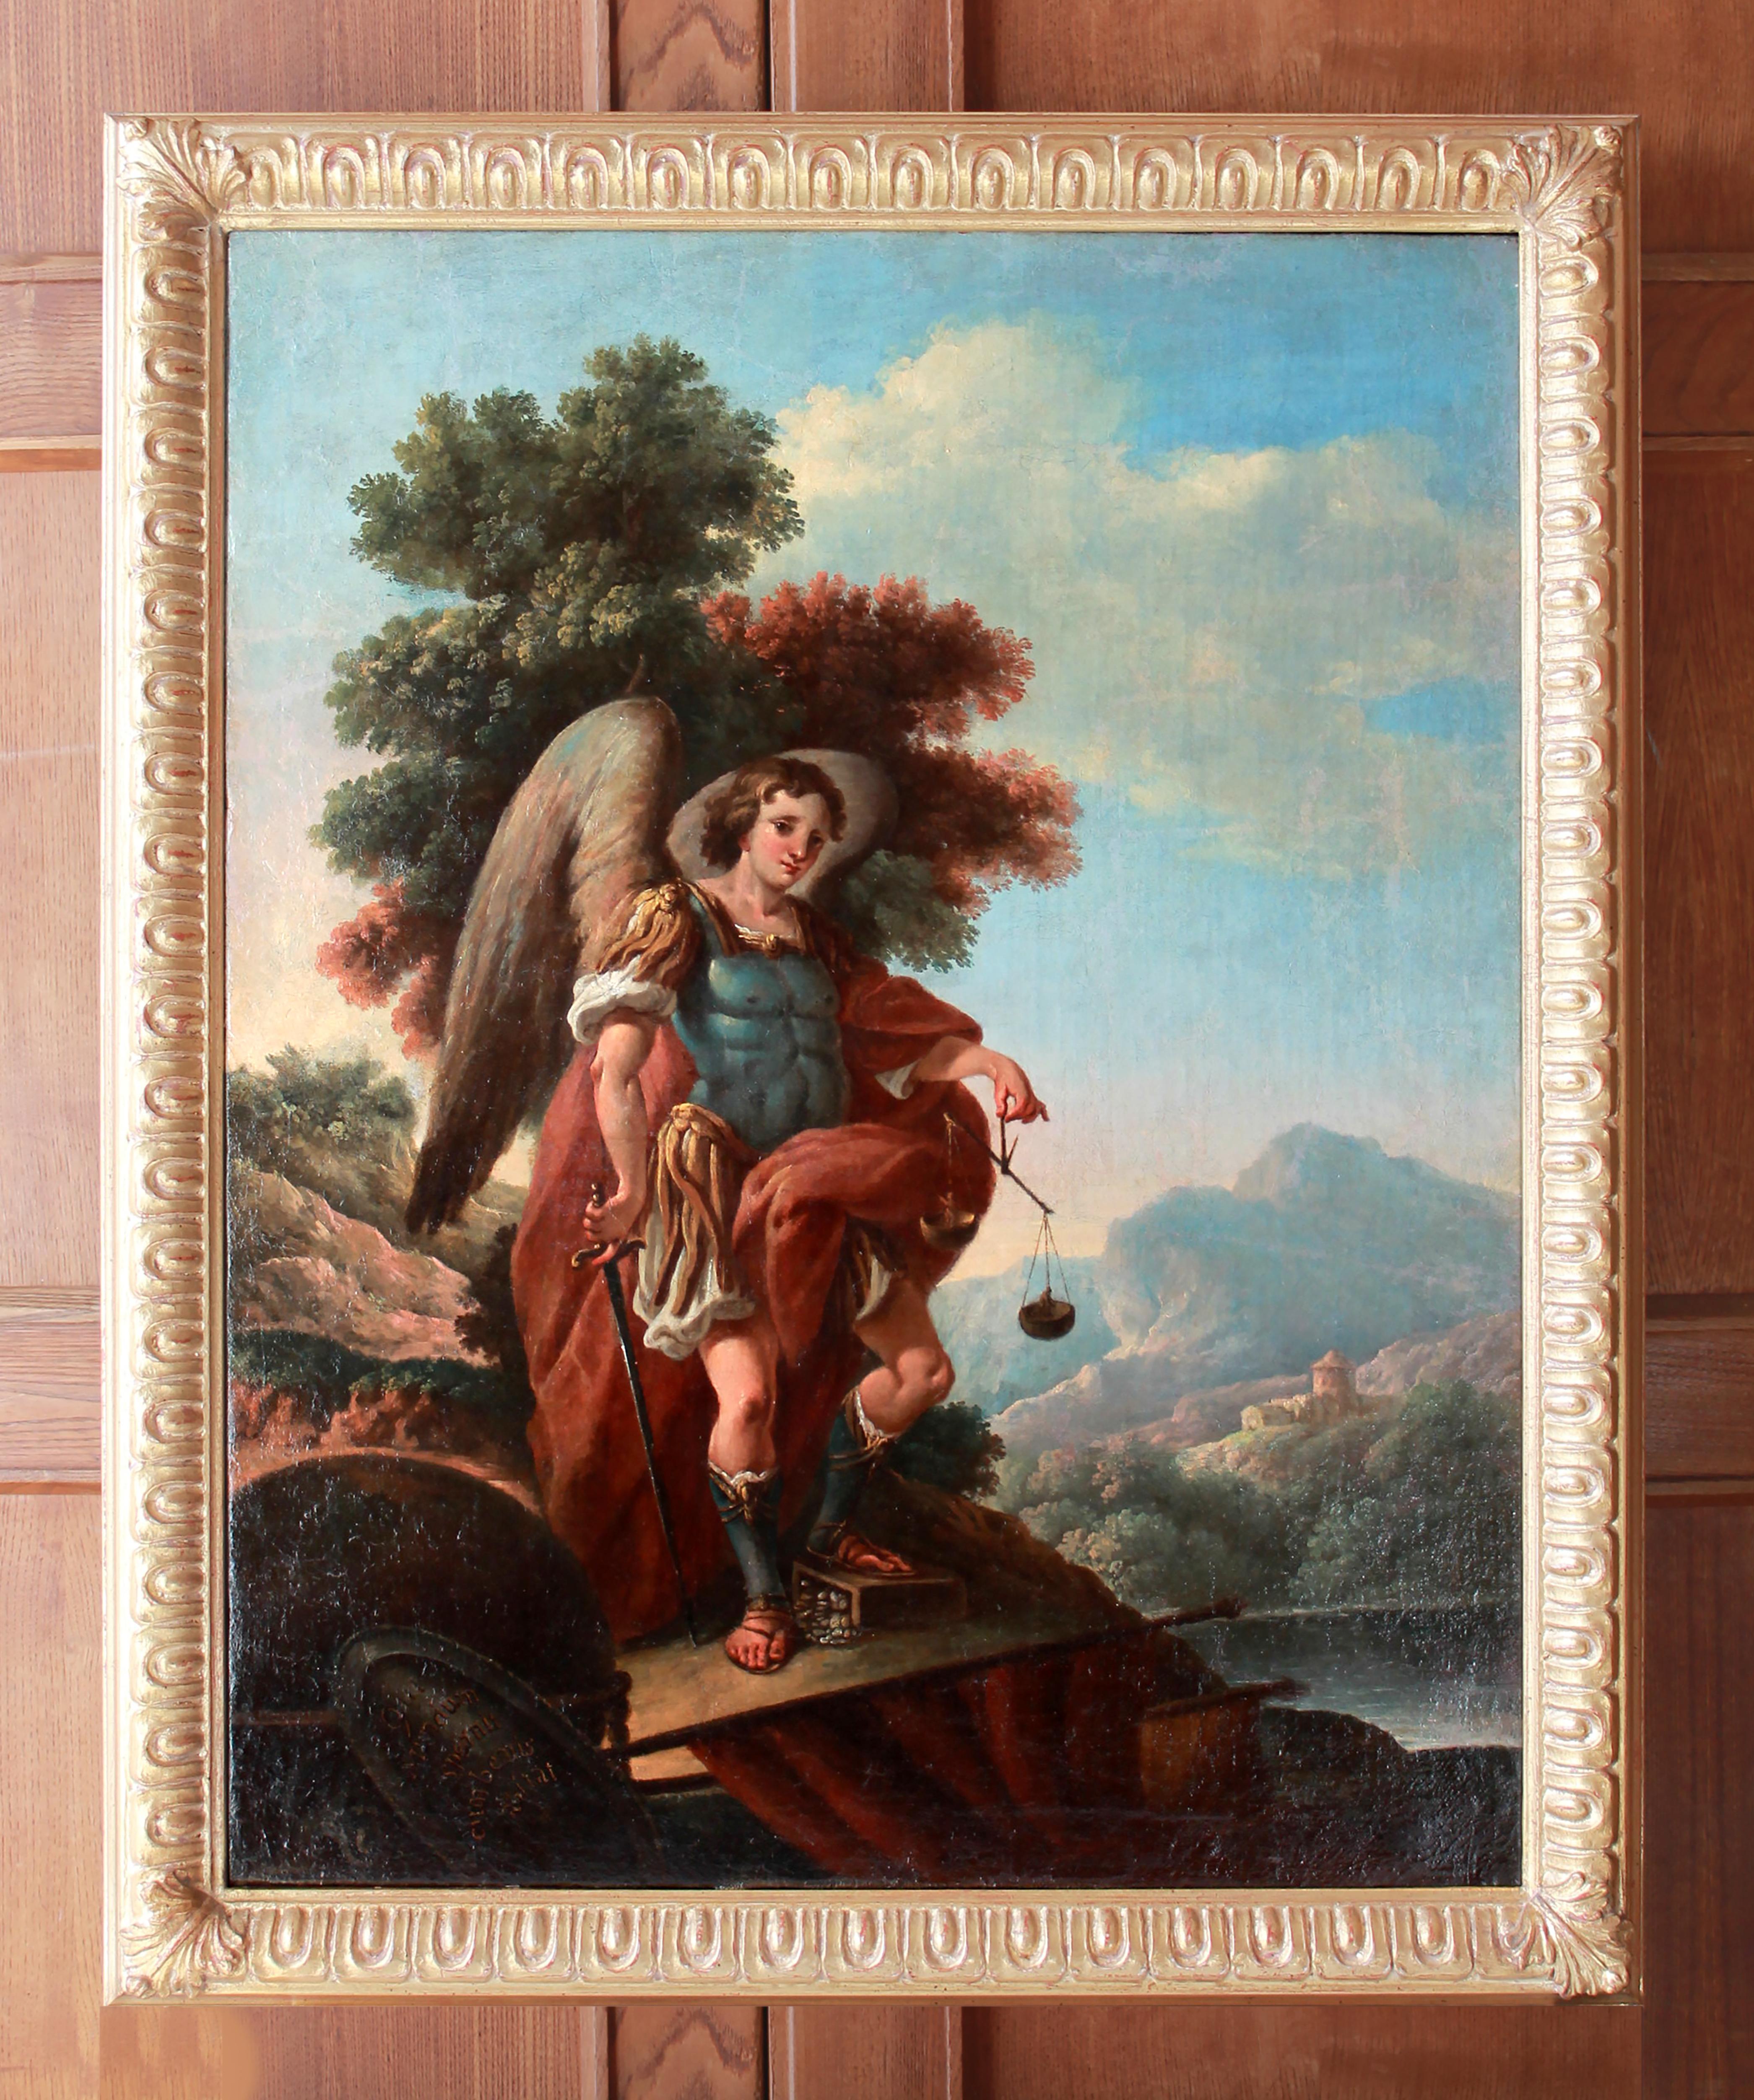 Stunning late 1700s baroque oil painting (Fiemme Valley. Trentino) Strongly considered a Unterperger's circle artwork by the experts hired for this task. 

*Studied by Dr. Danieli, Michele (Conservation and Restoration, Italian Baroque art, and